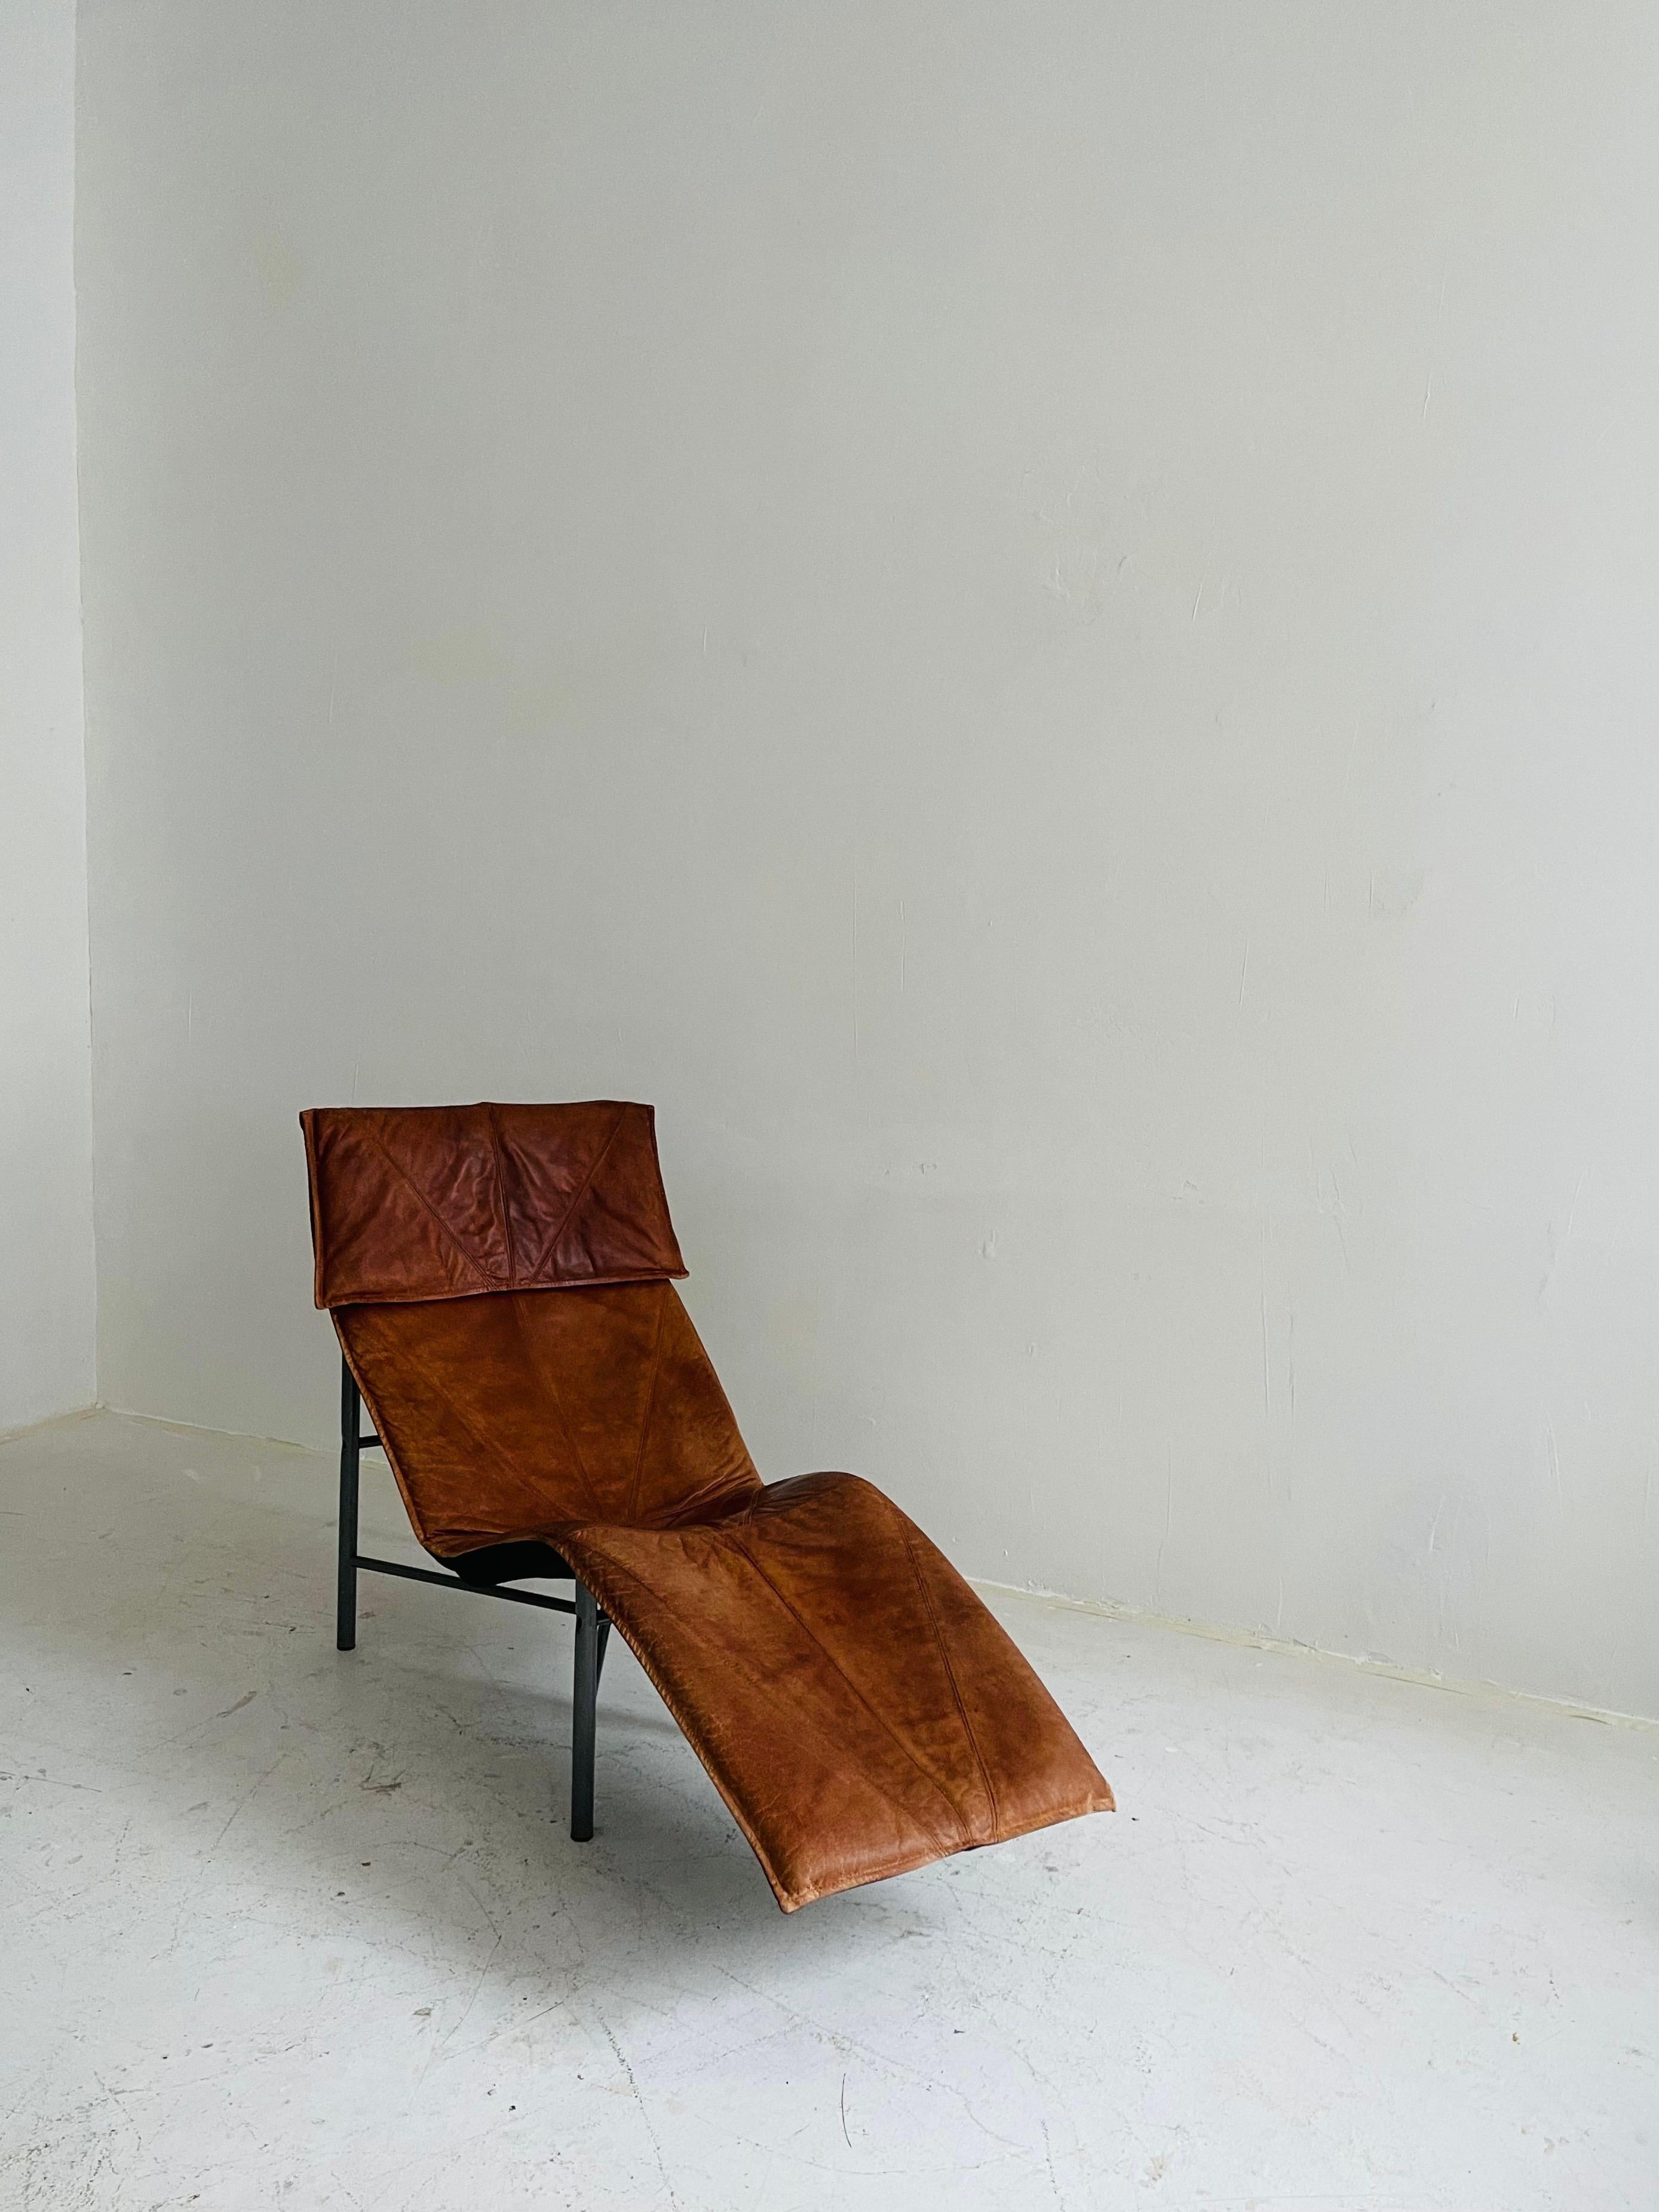 Patinated Cognac Leather Chaise Longue by Tord Bjorklund, Sweden, 1970 For Sale 9